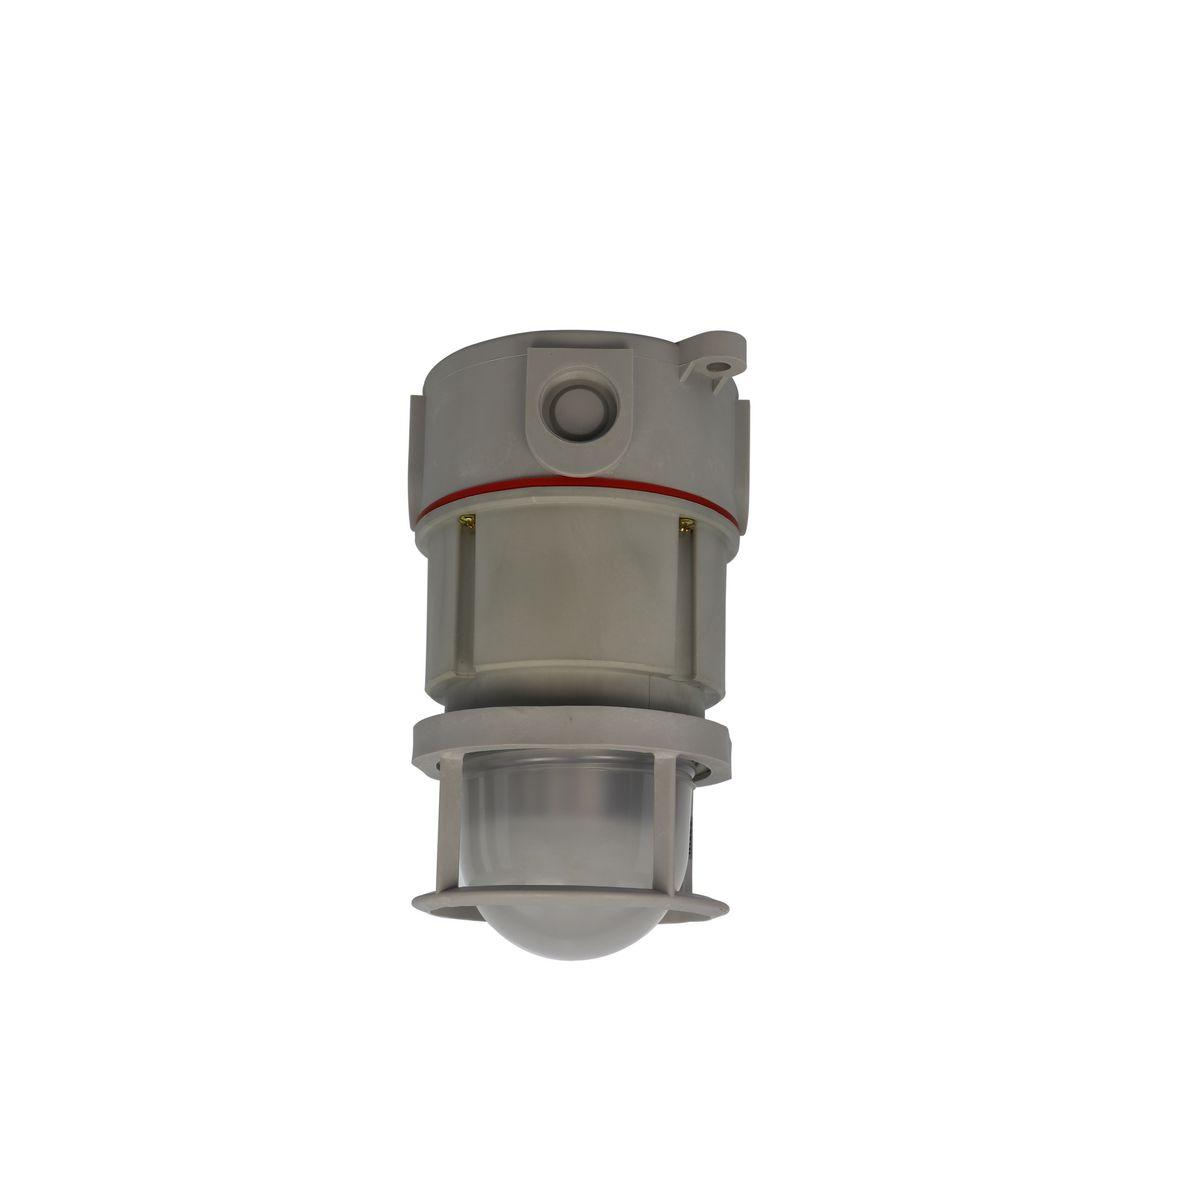 Hubbell NVL230X2G NVL Series Non-Metallic Corrosion Resistant Hazardous Location LED Fixture, 3/4" Ceiling Mount With Guard  ; Energy and labor-saving LED ; High Efﬁcacy (lumens per watt) ; Compact Size ; Type 3, 4, & 4X Rated ; IP66 Marine Rated ; ABS Approved ; Resists c